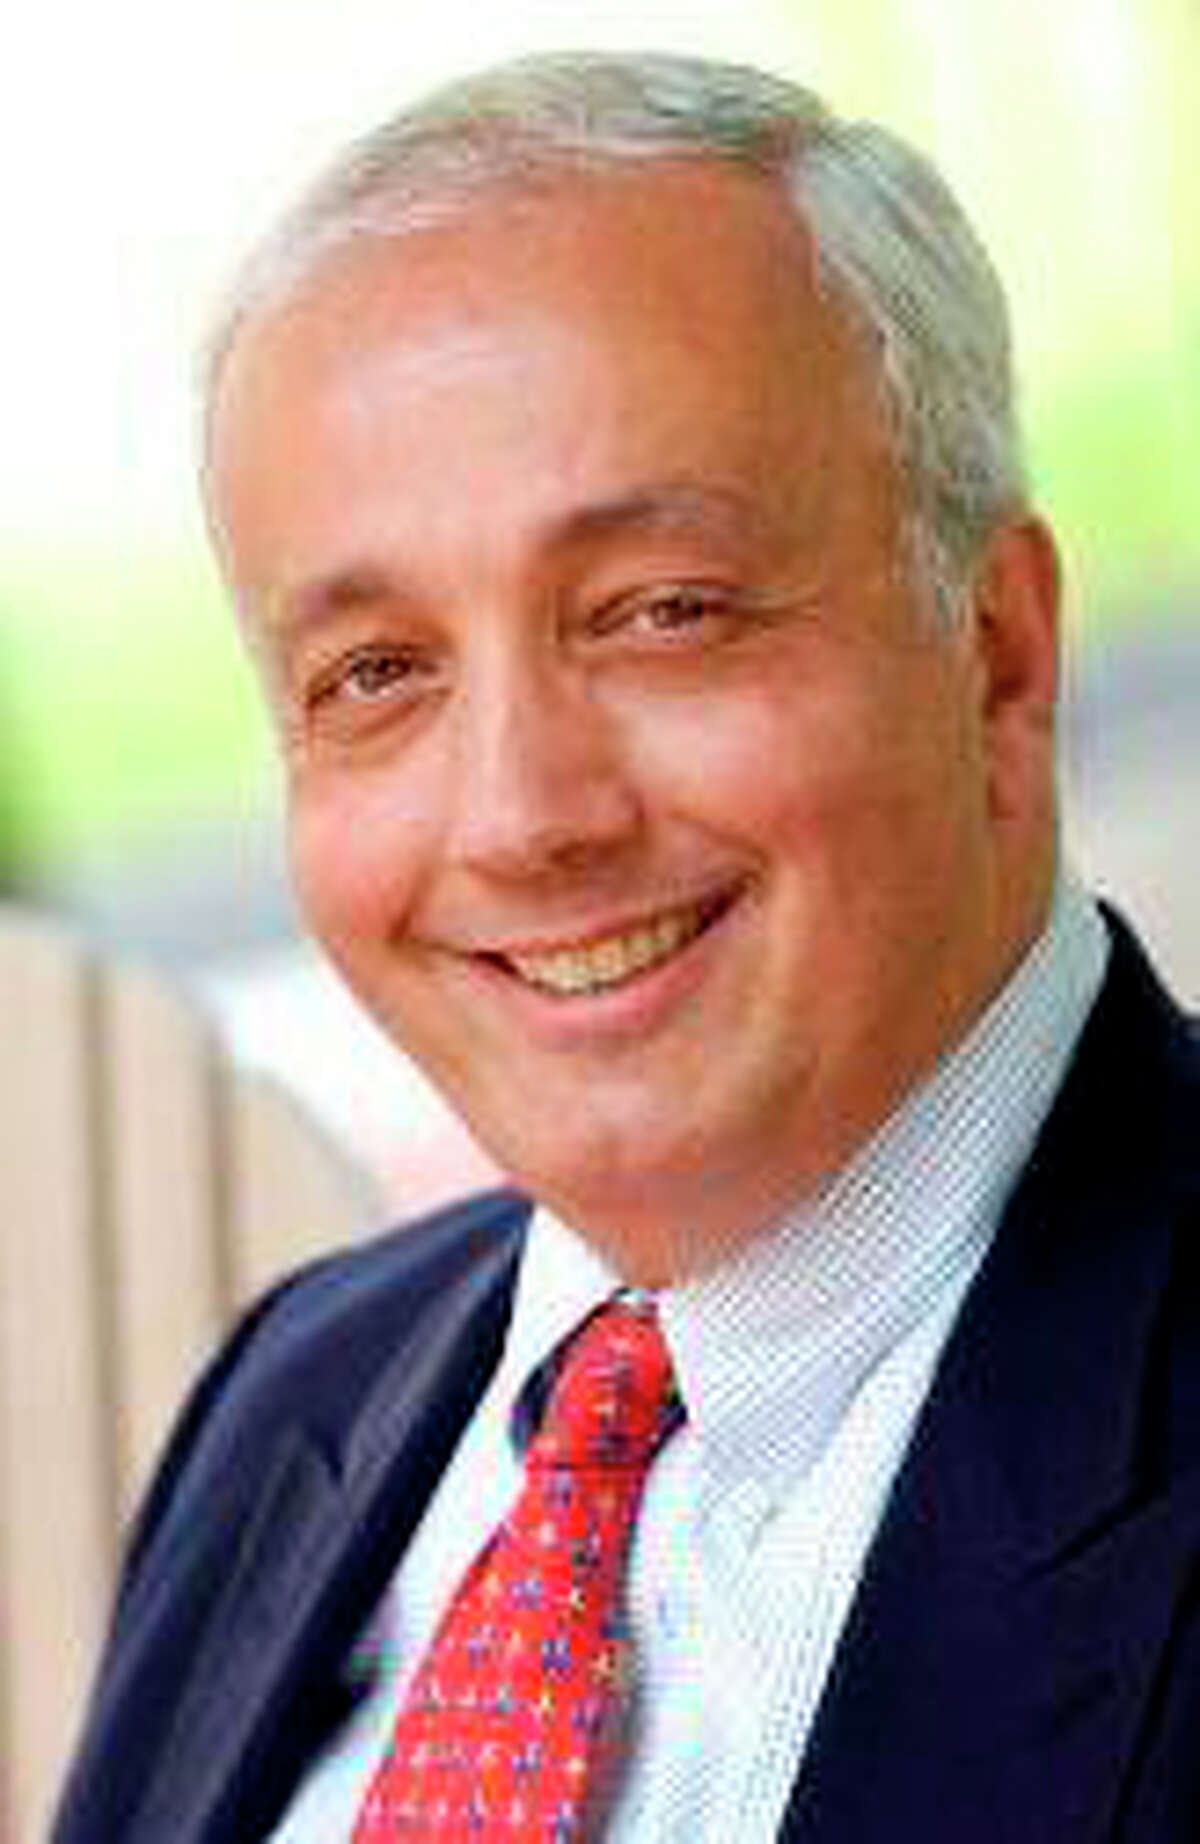 Anthony Cernera resigned after over 20 years as the president of Sacred Heart University in Fairfield on Thursday, Oct. 28, 2010.